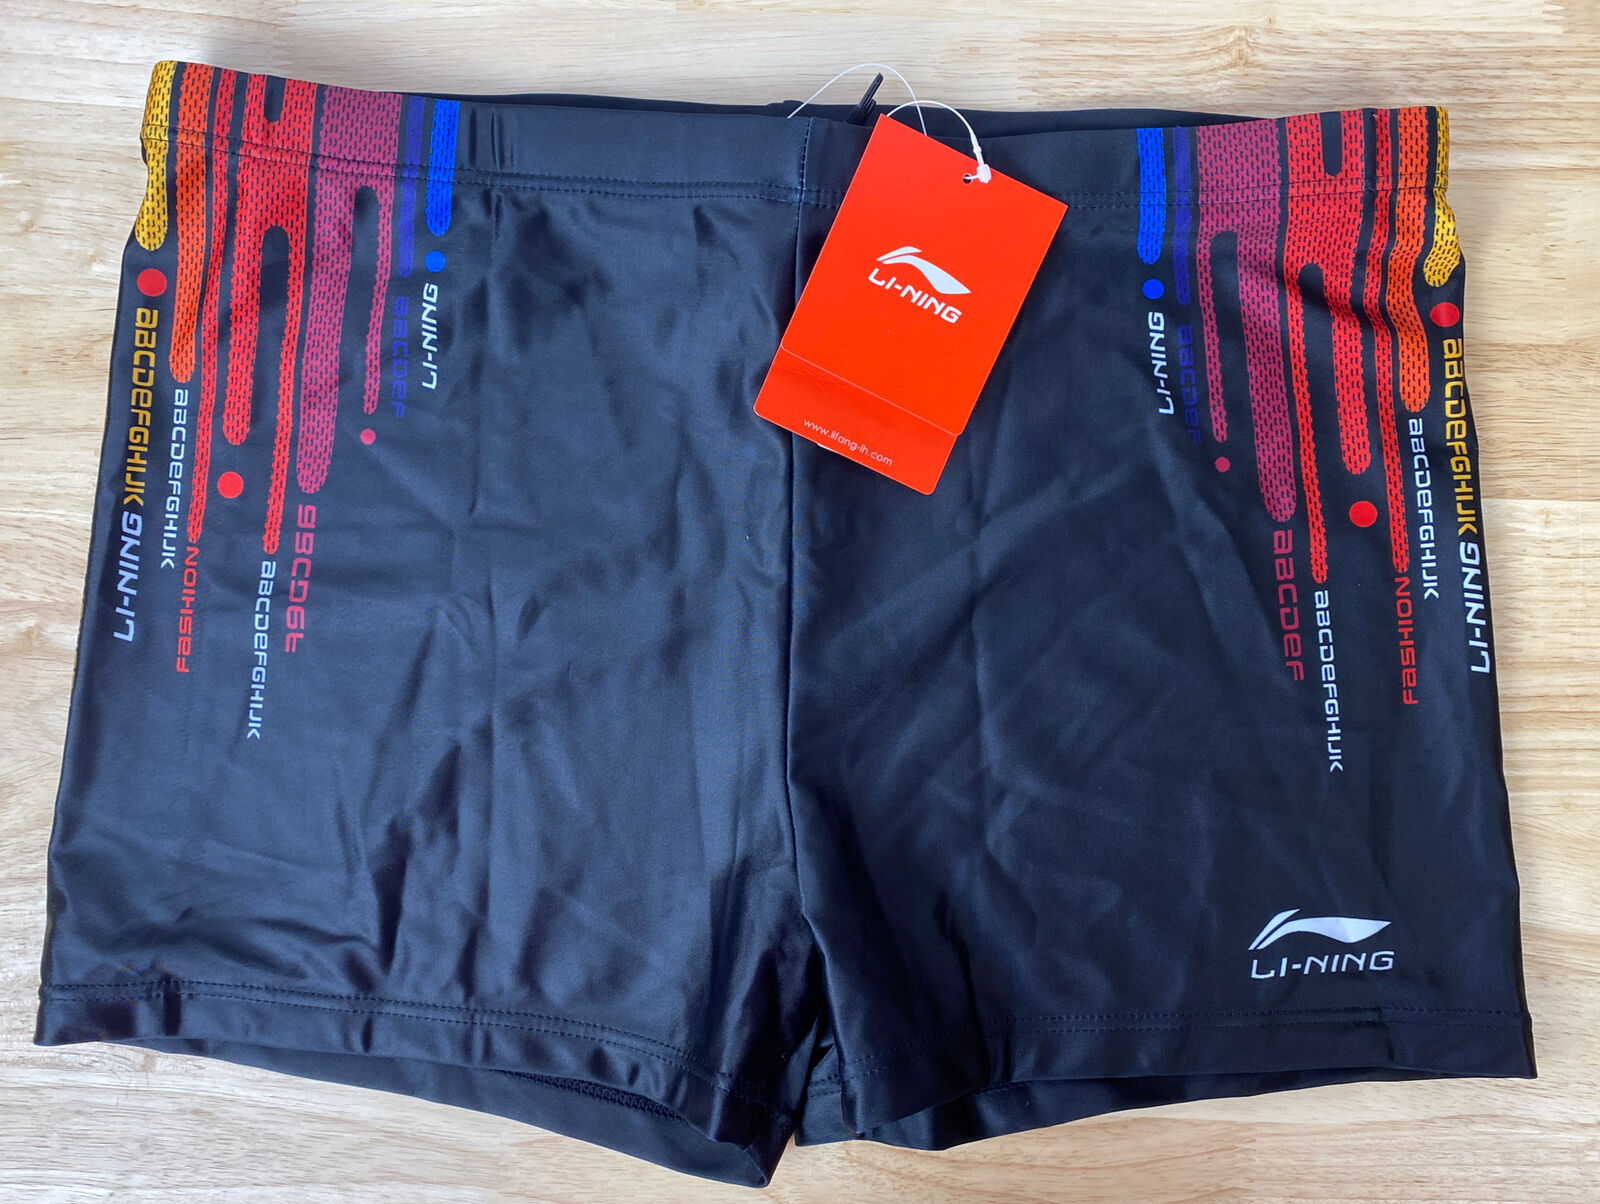 Branded goods Li-Ning Table Tennis Shorts Size 3XL Brand New F10 Tag safety With